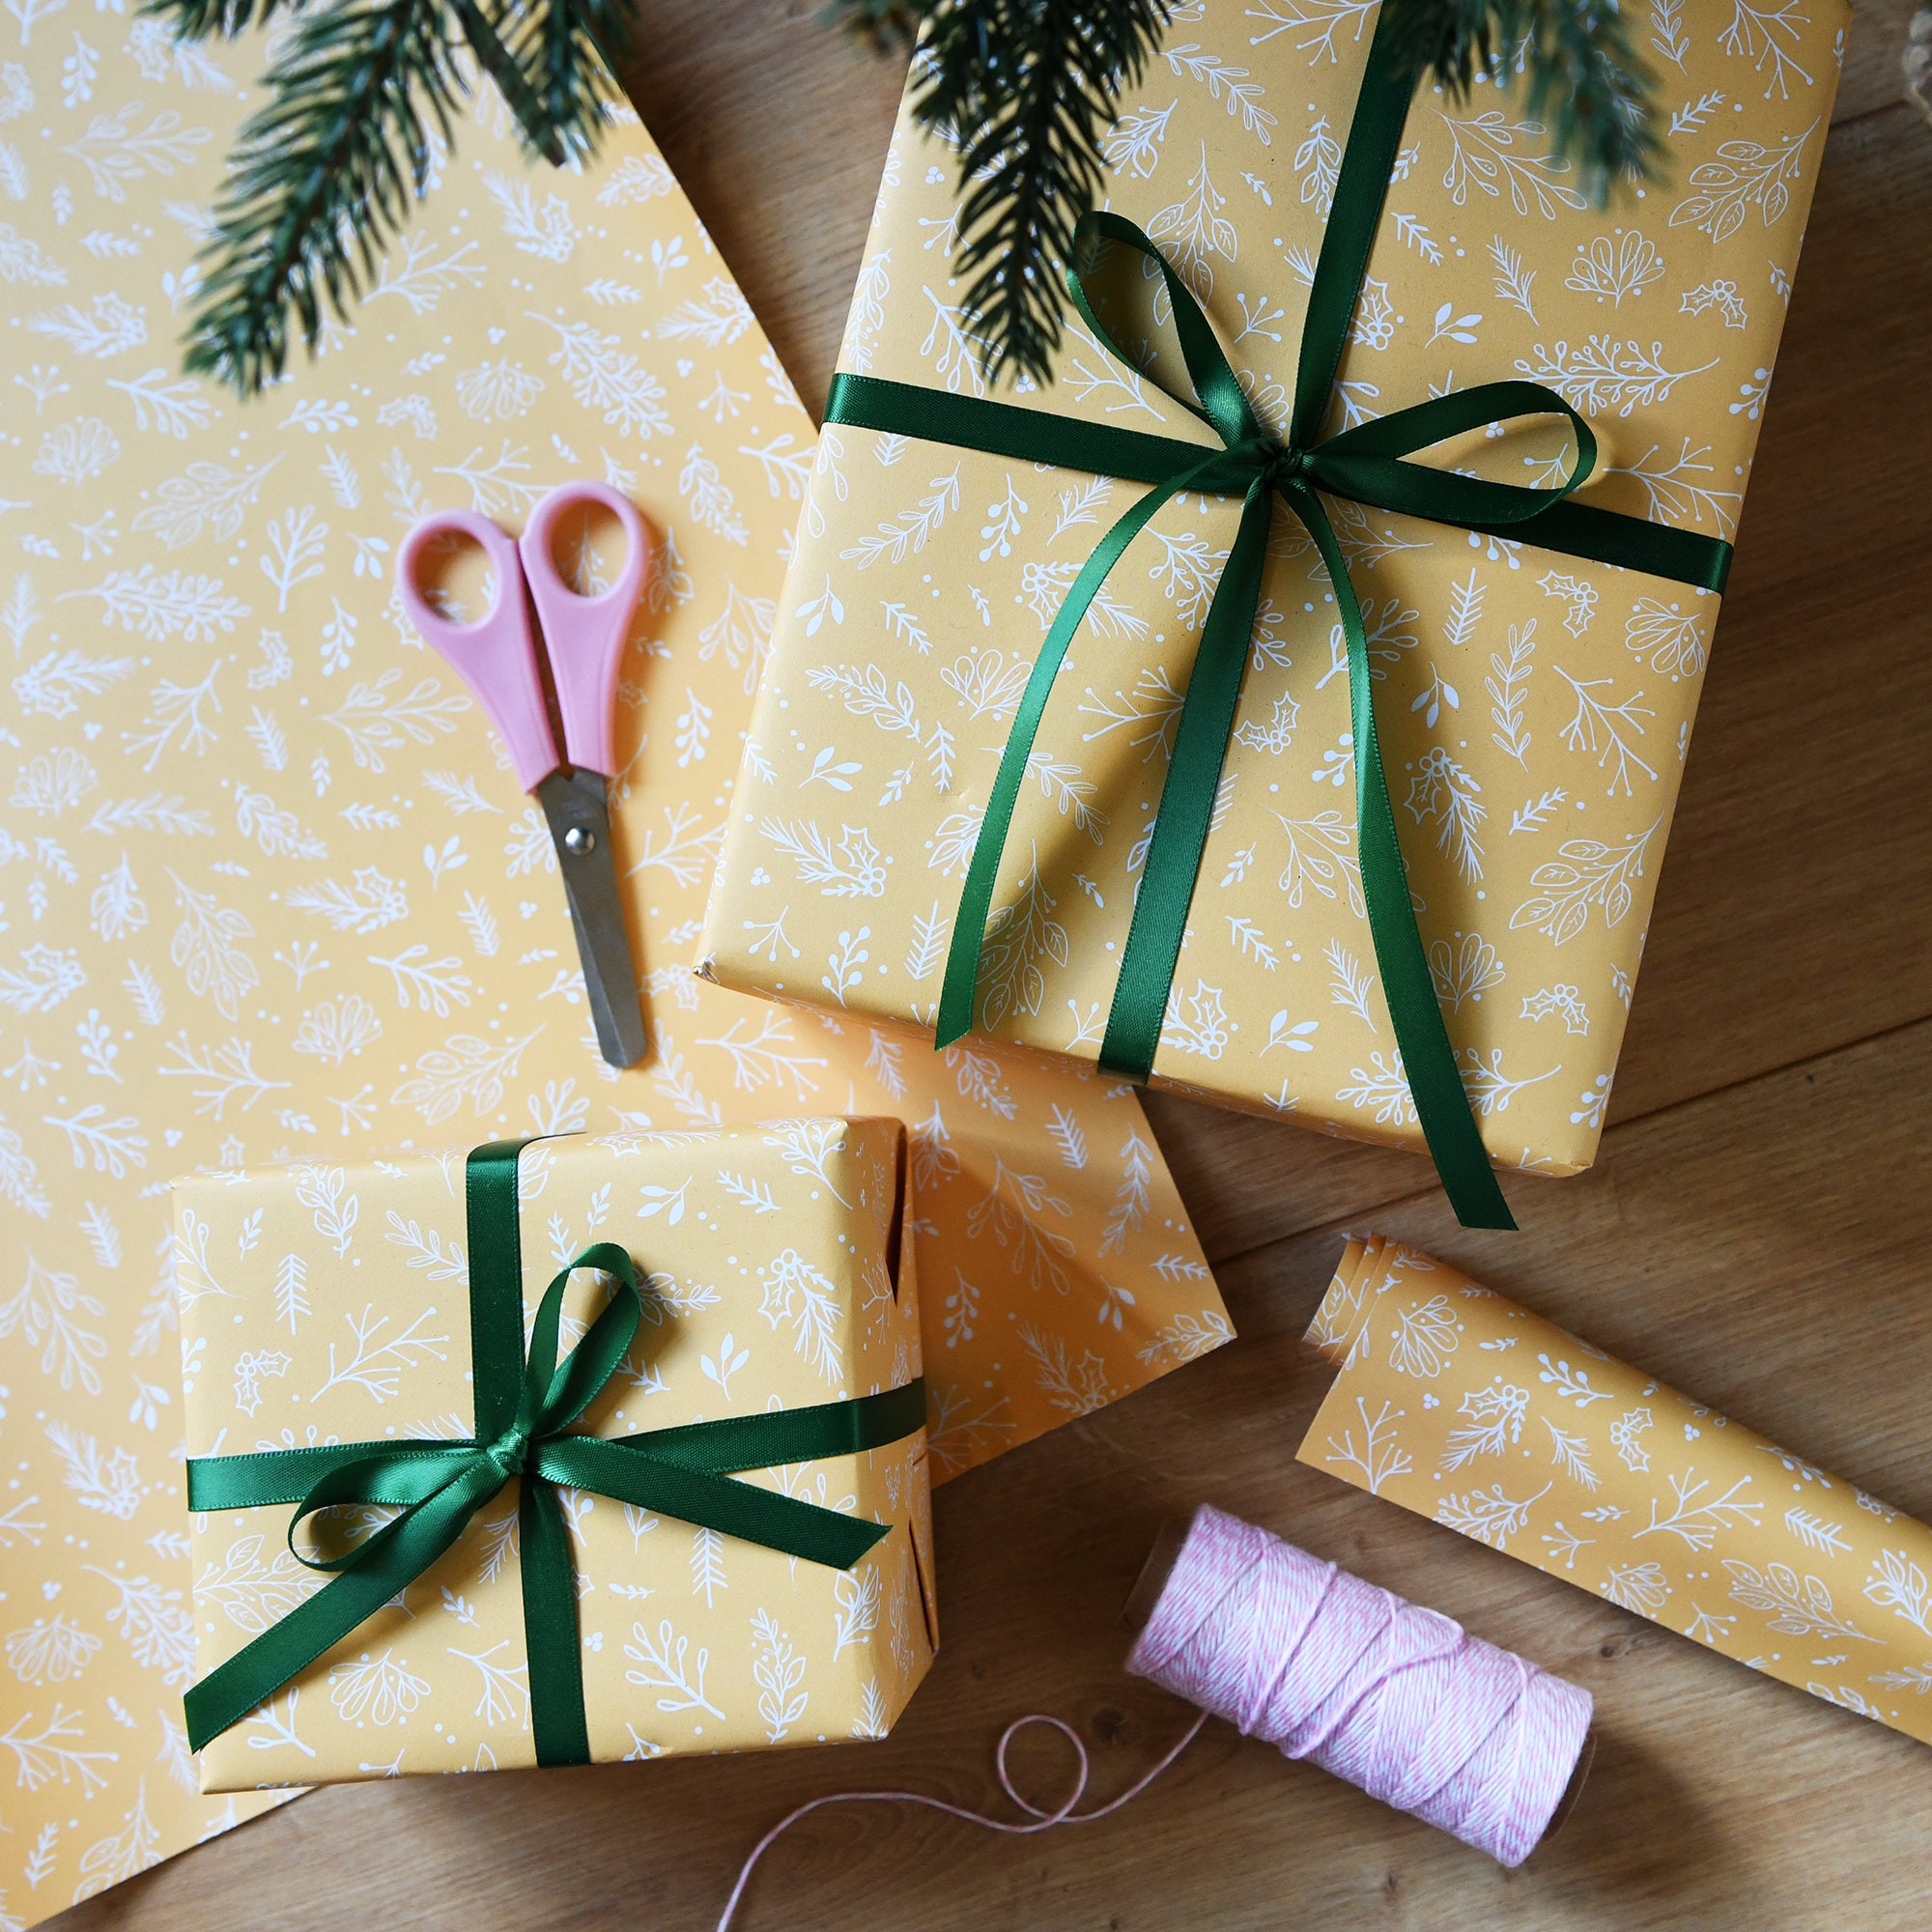 Edunass Wrapping Paper Christmas Wrapping Paper Sheets,Eco Gift Wrapping Paper,Kraft Wrapping Paper Set with Sticker Ribbon,Gift Wrap Christmas Rapping